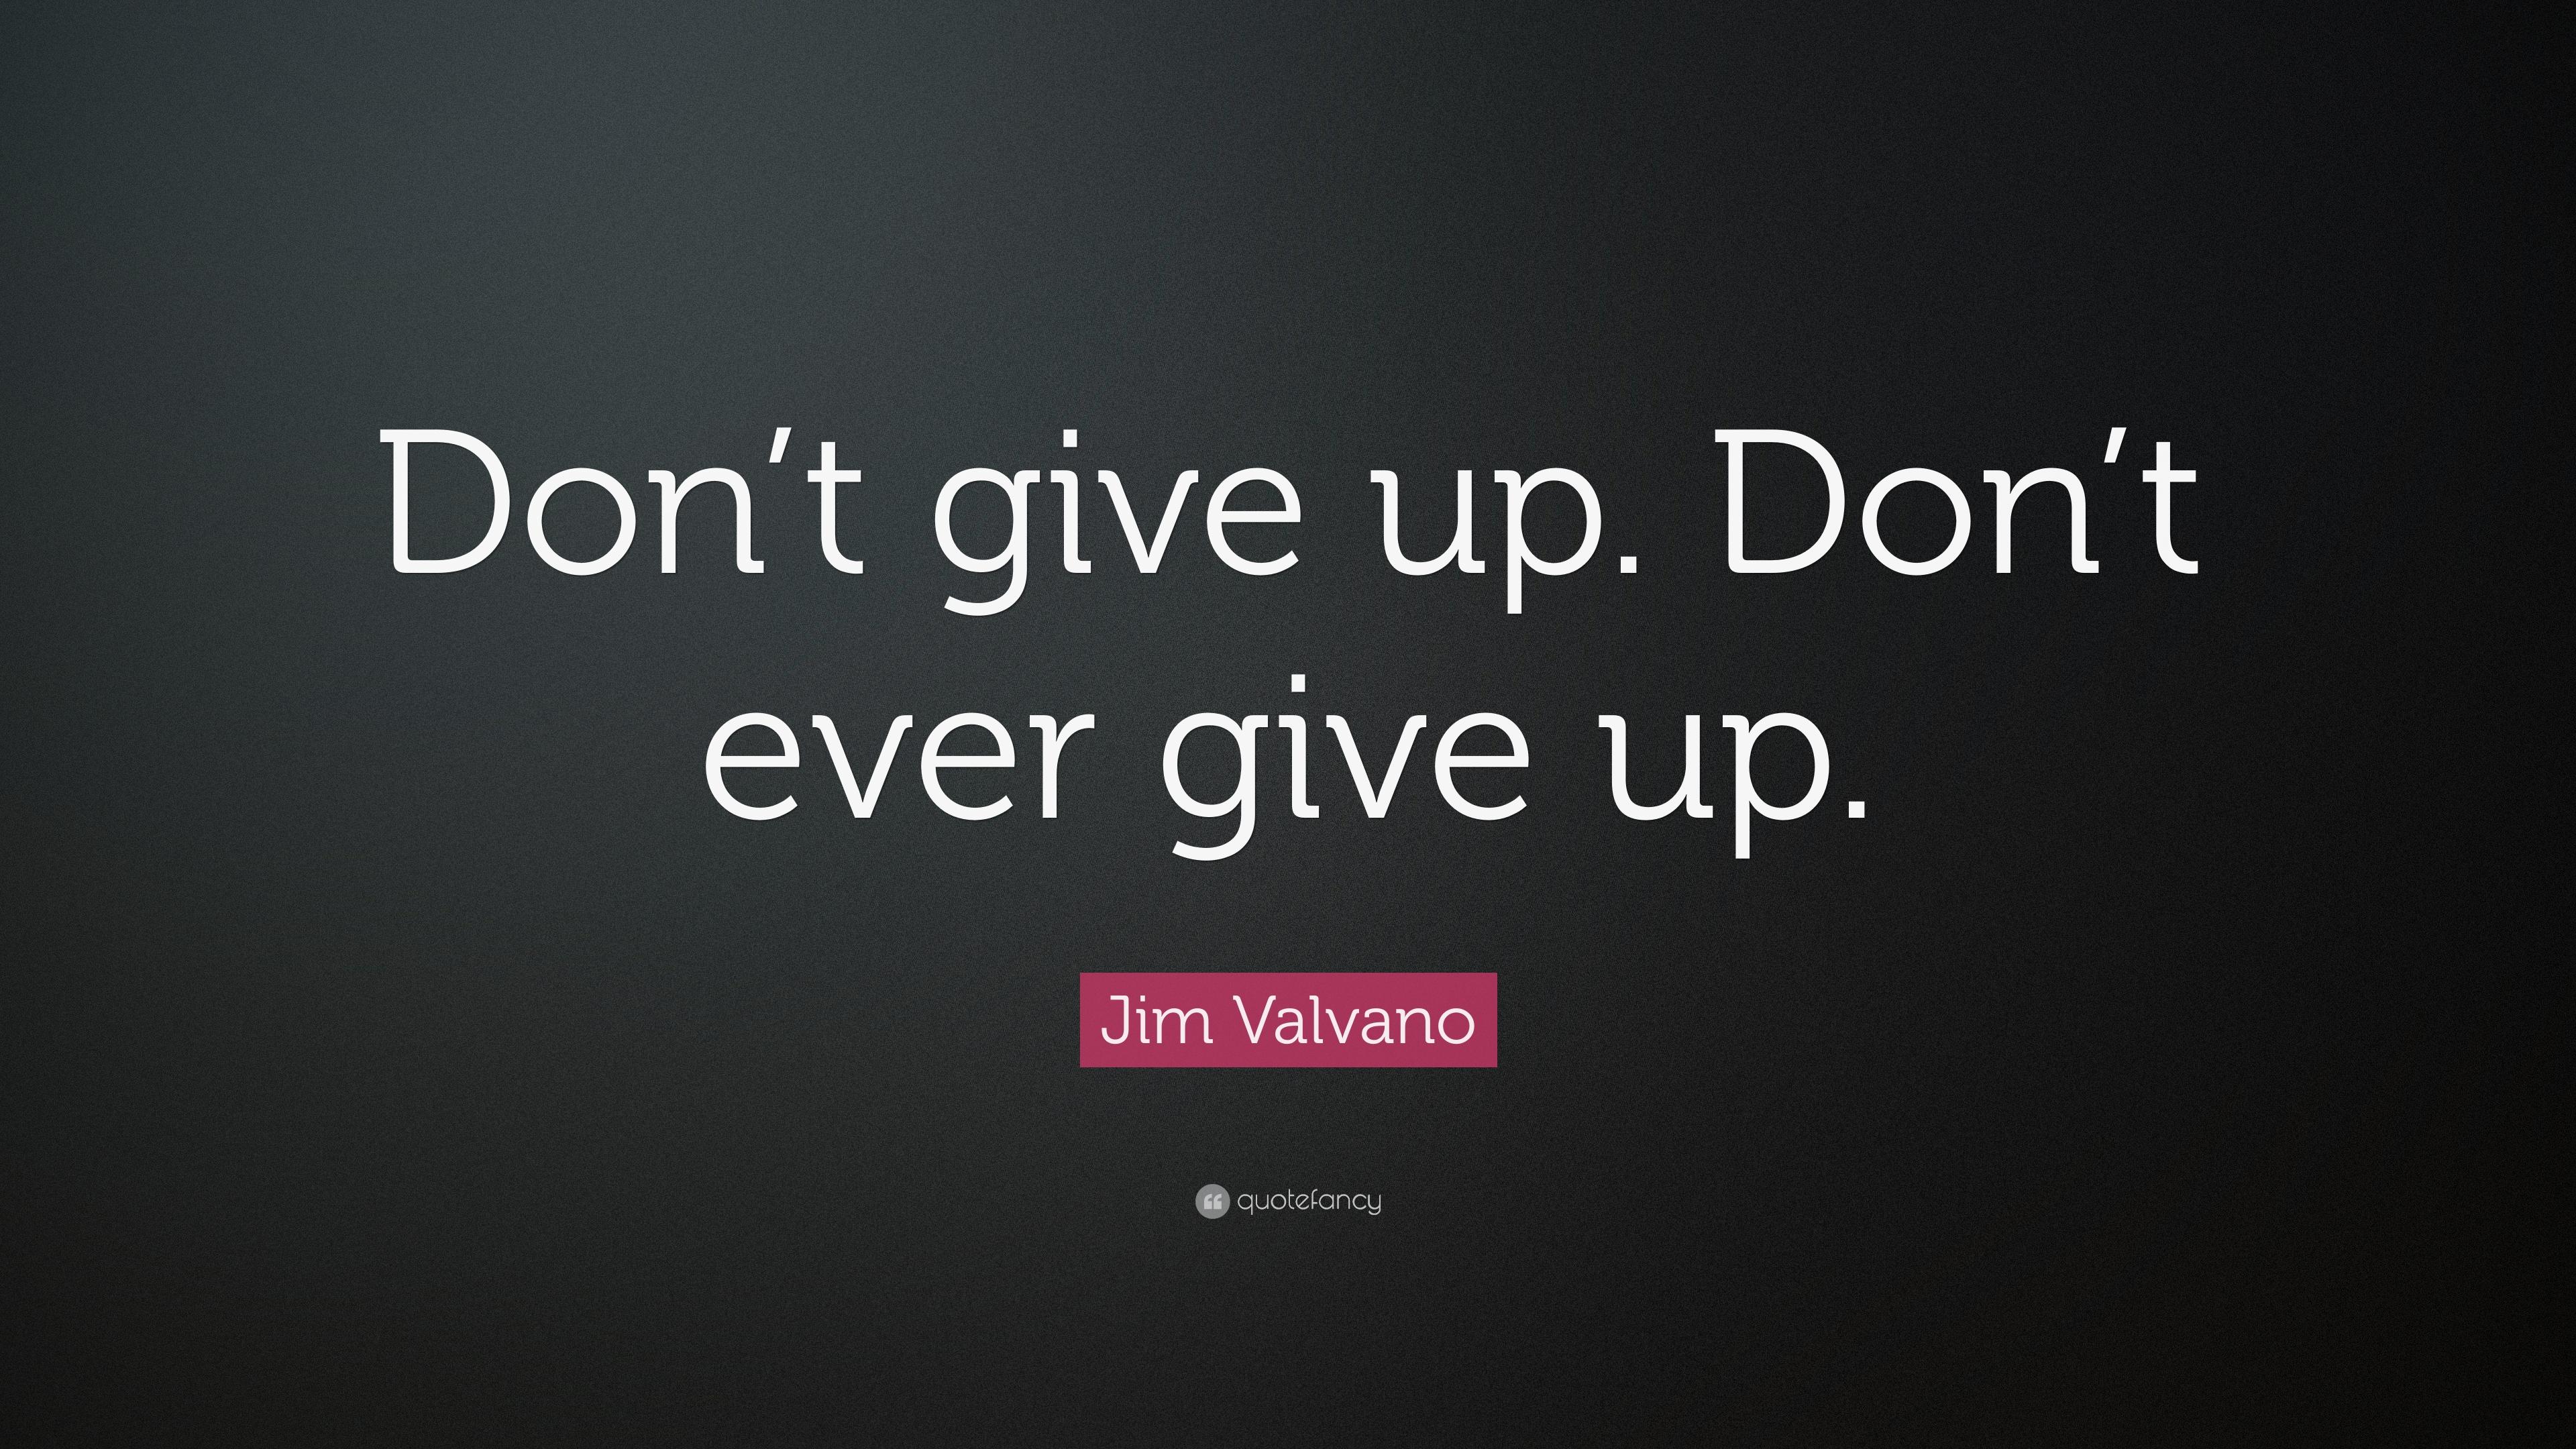 Jim Valvano Quote: “Don't give up. Don't ever give up.” 19